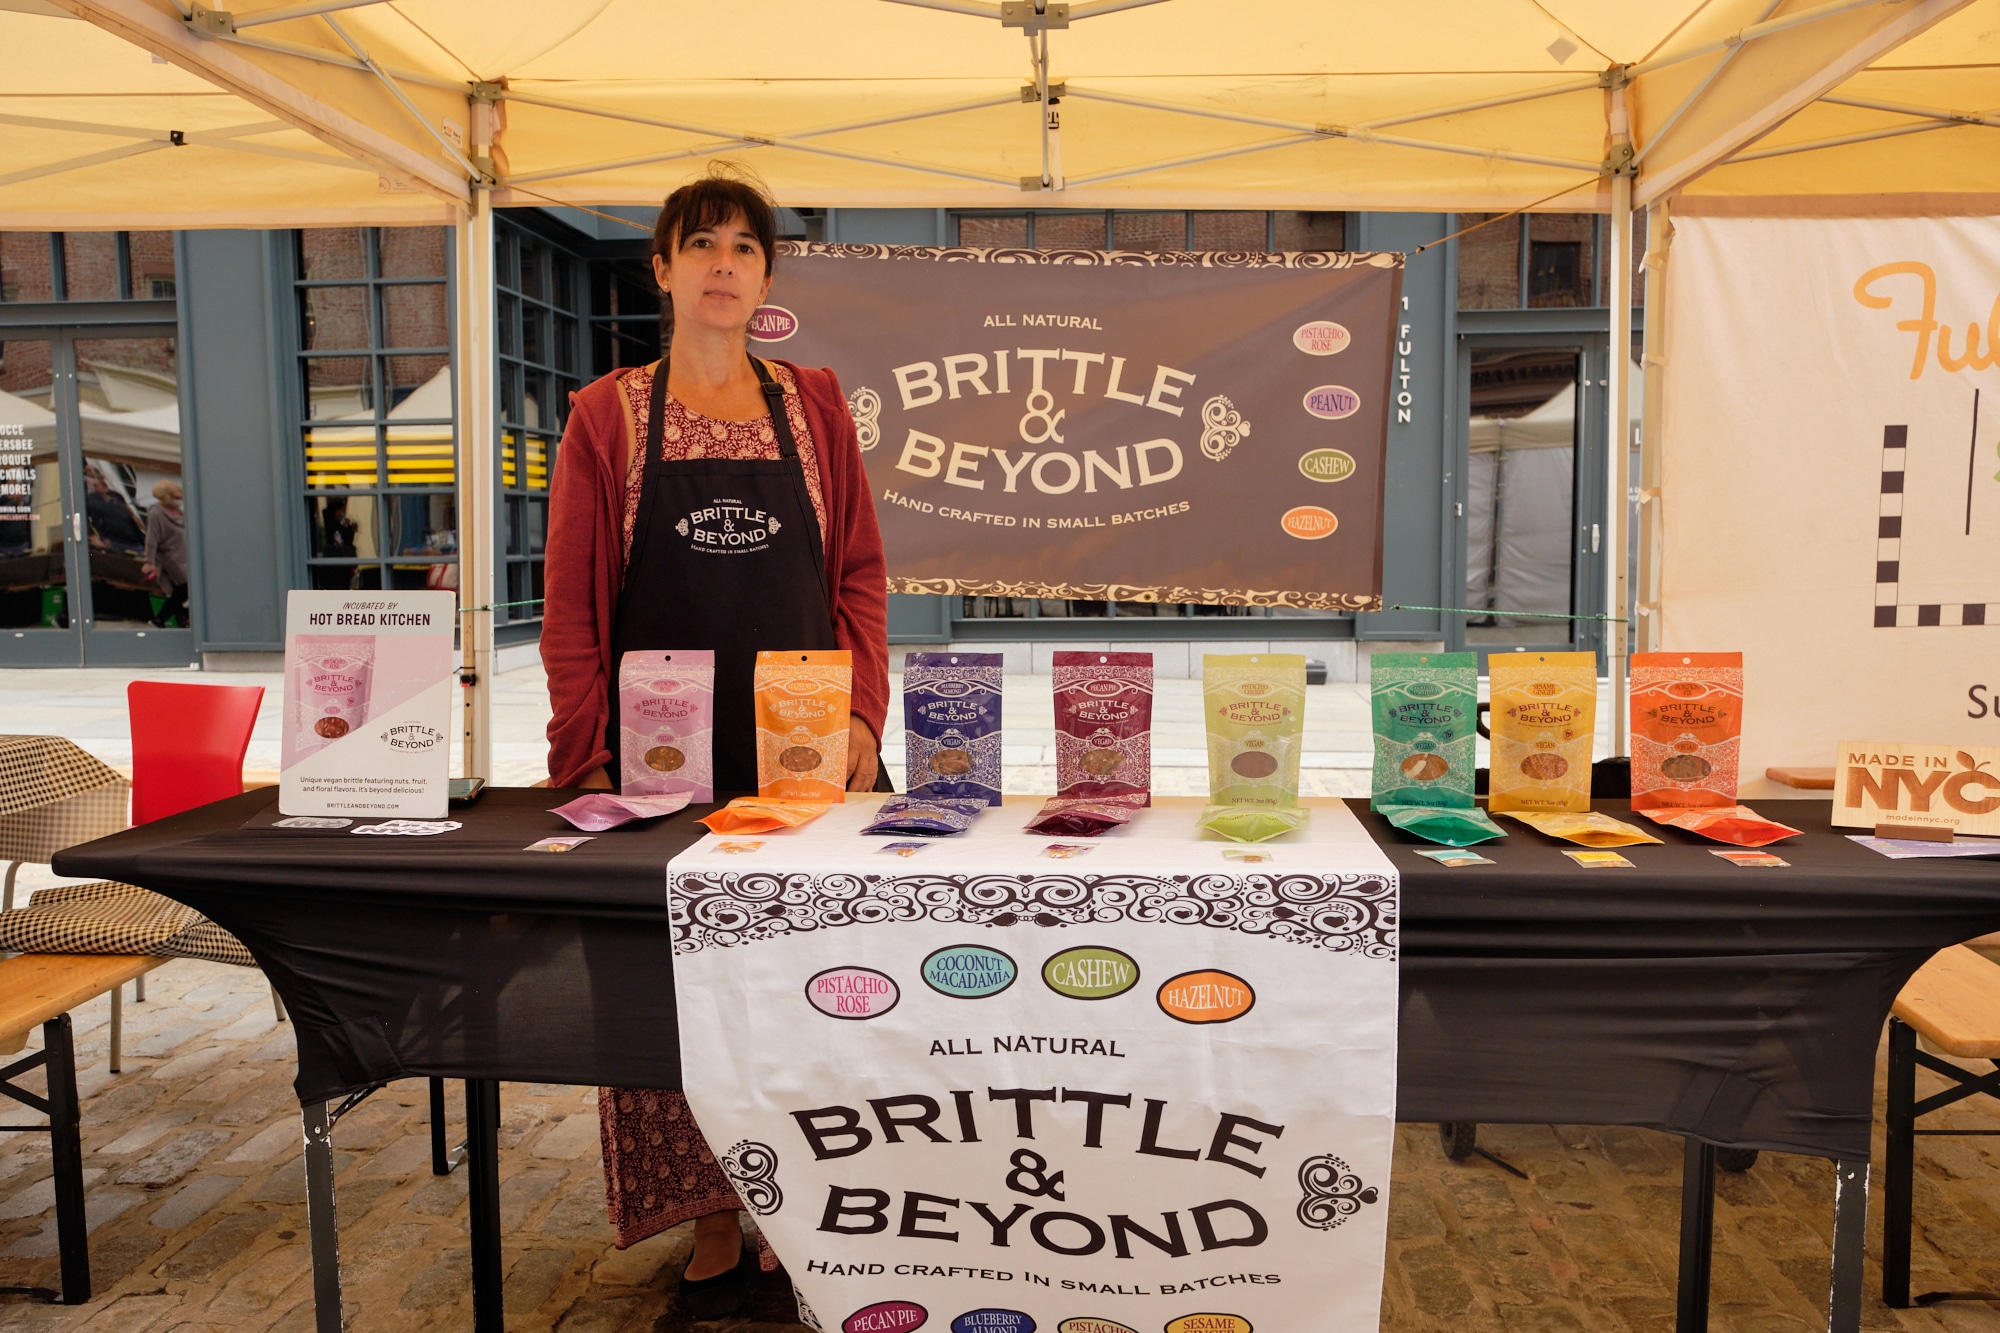 Brittle & Beyond table at the Hester Street Fair in NYC